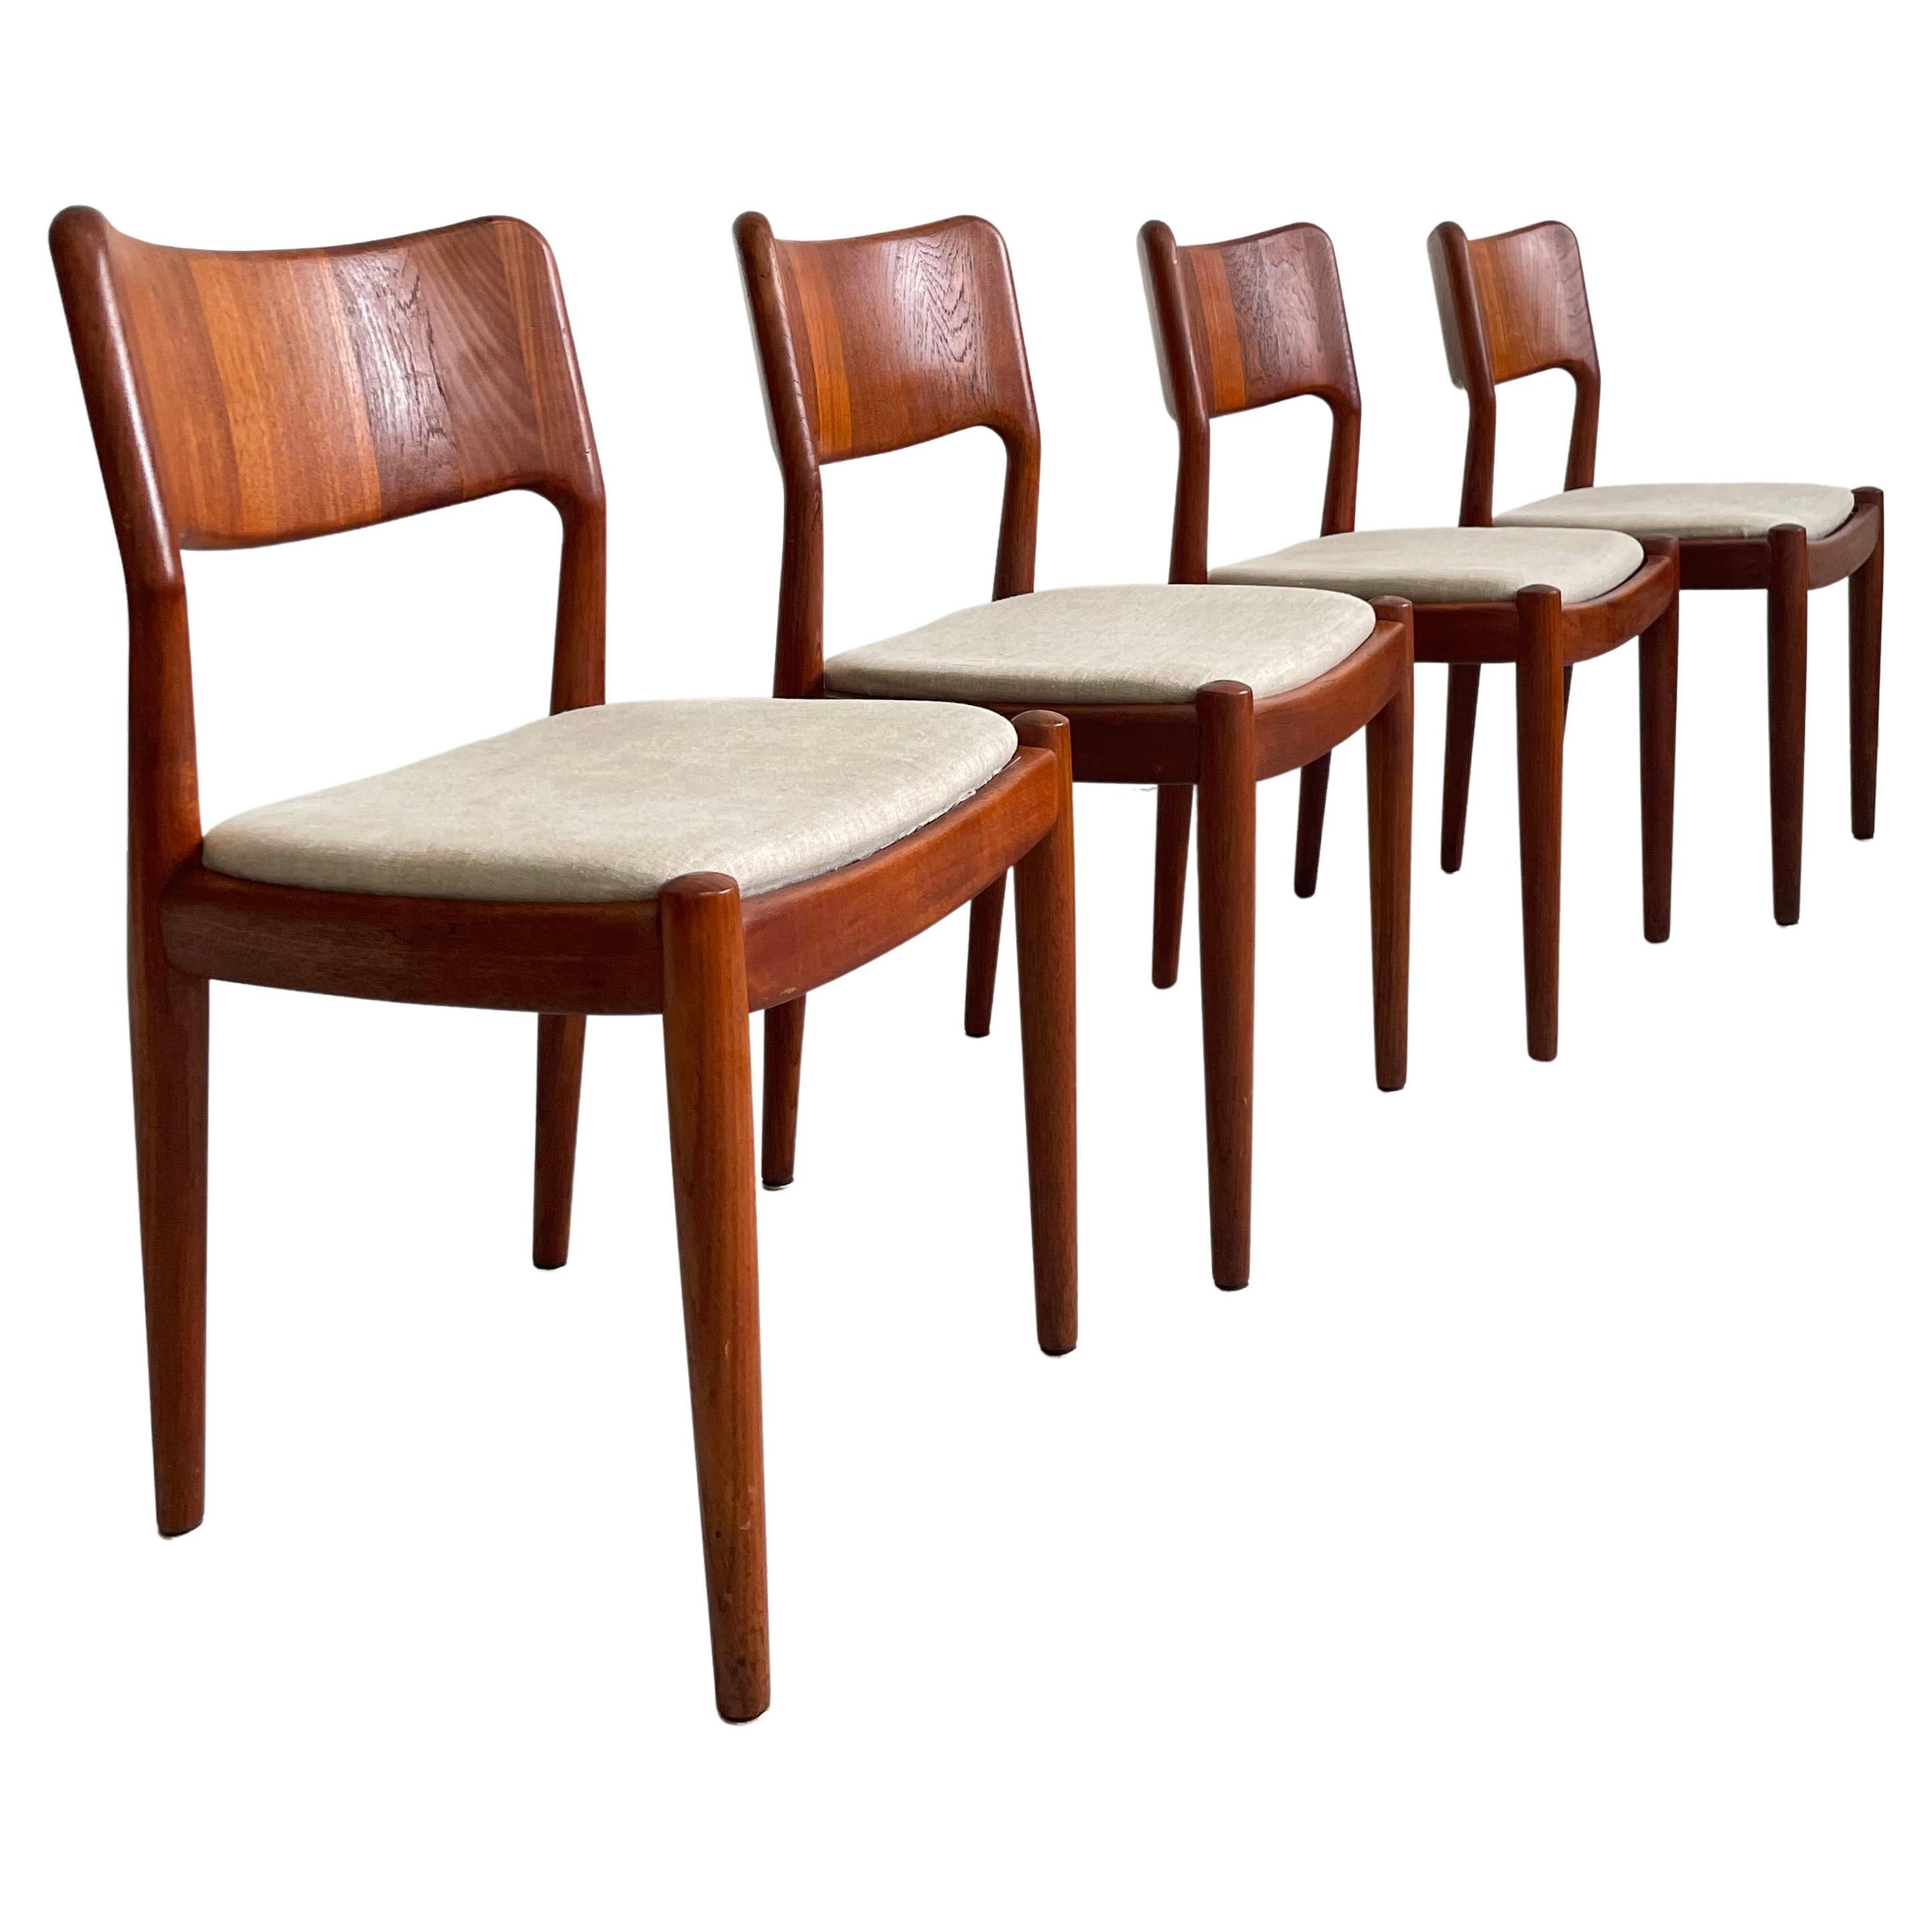 Set of 4 Vintage Scandinavian Mid-century Modern Teak Dining Chairs by Glostrup For Sale